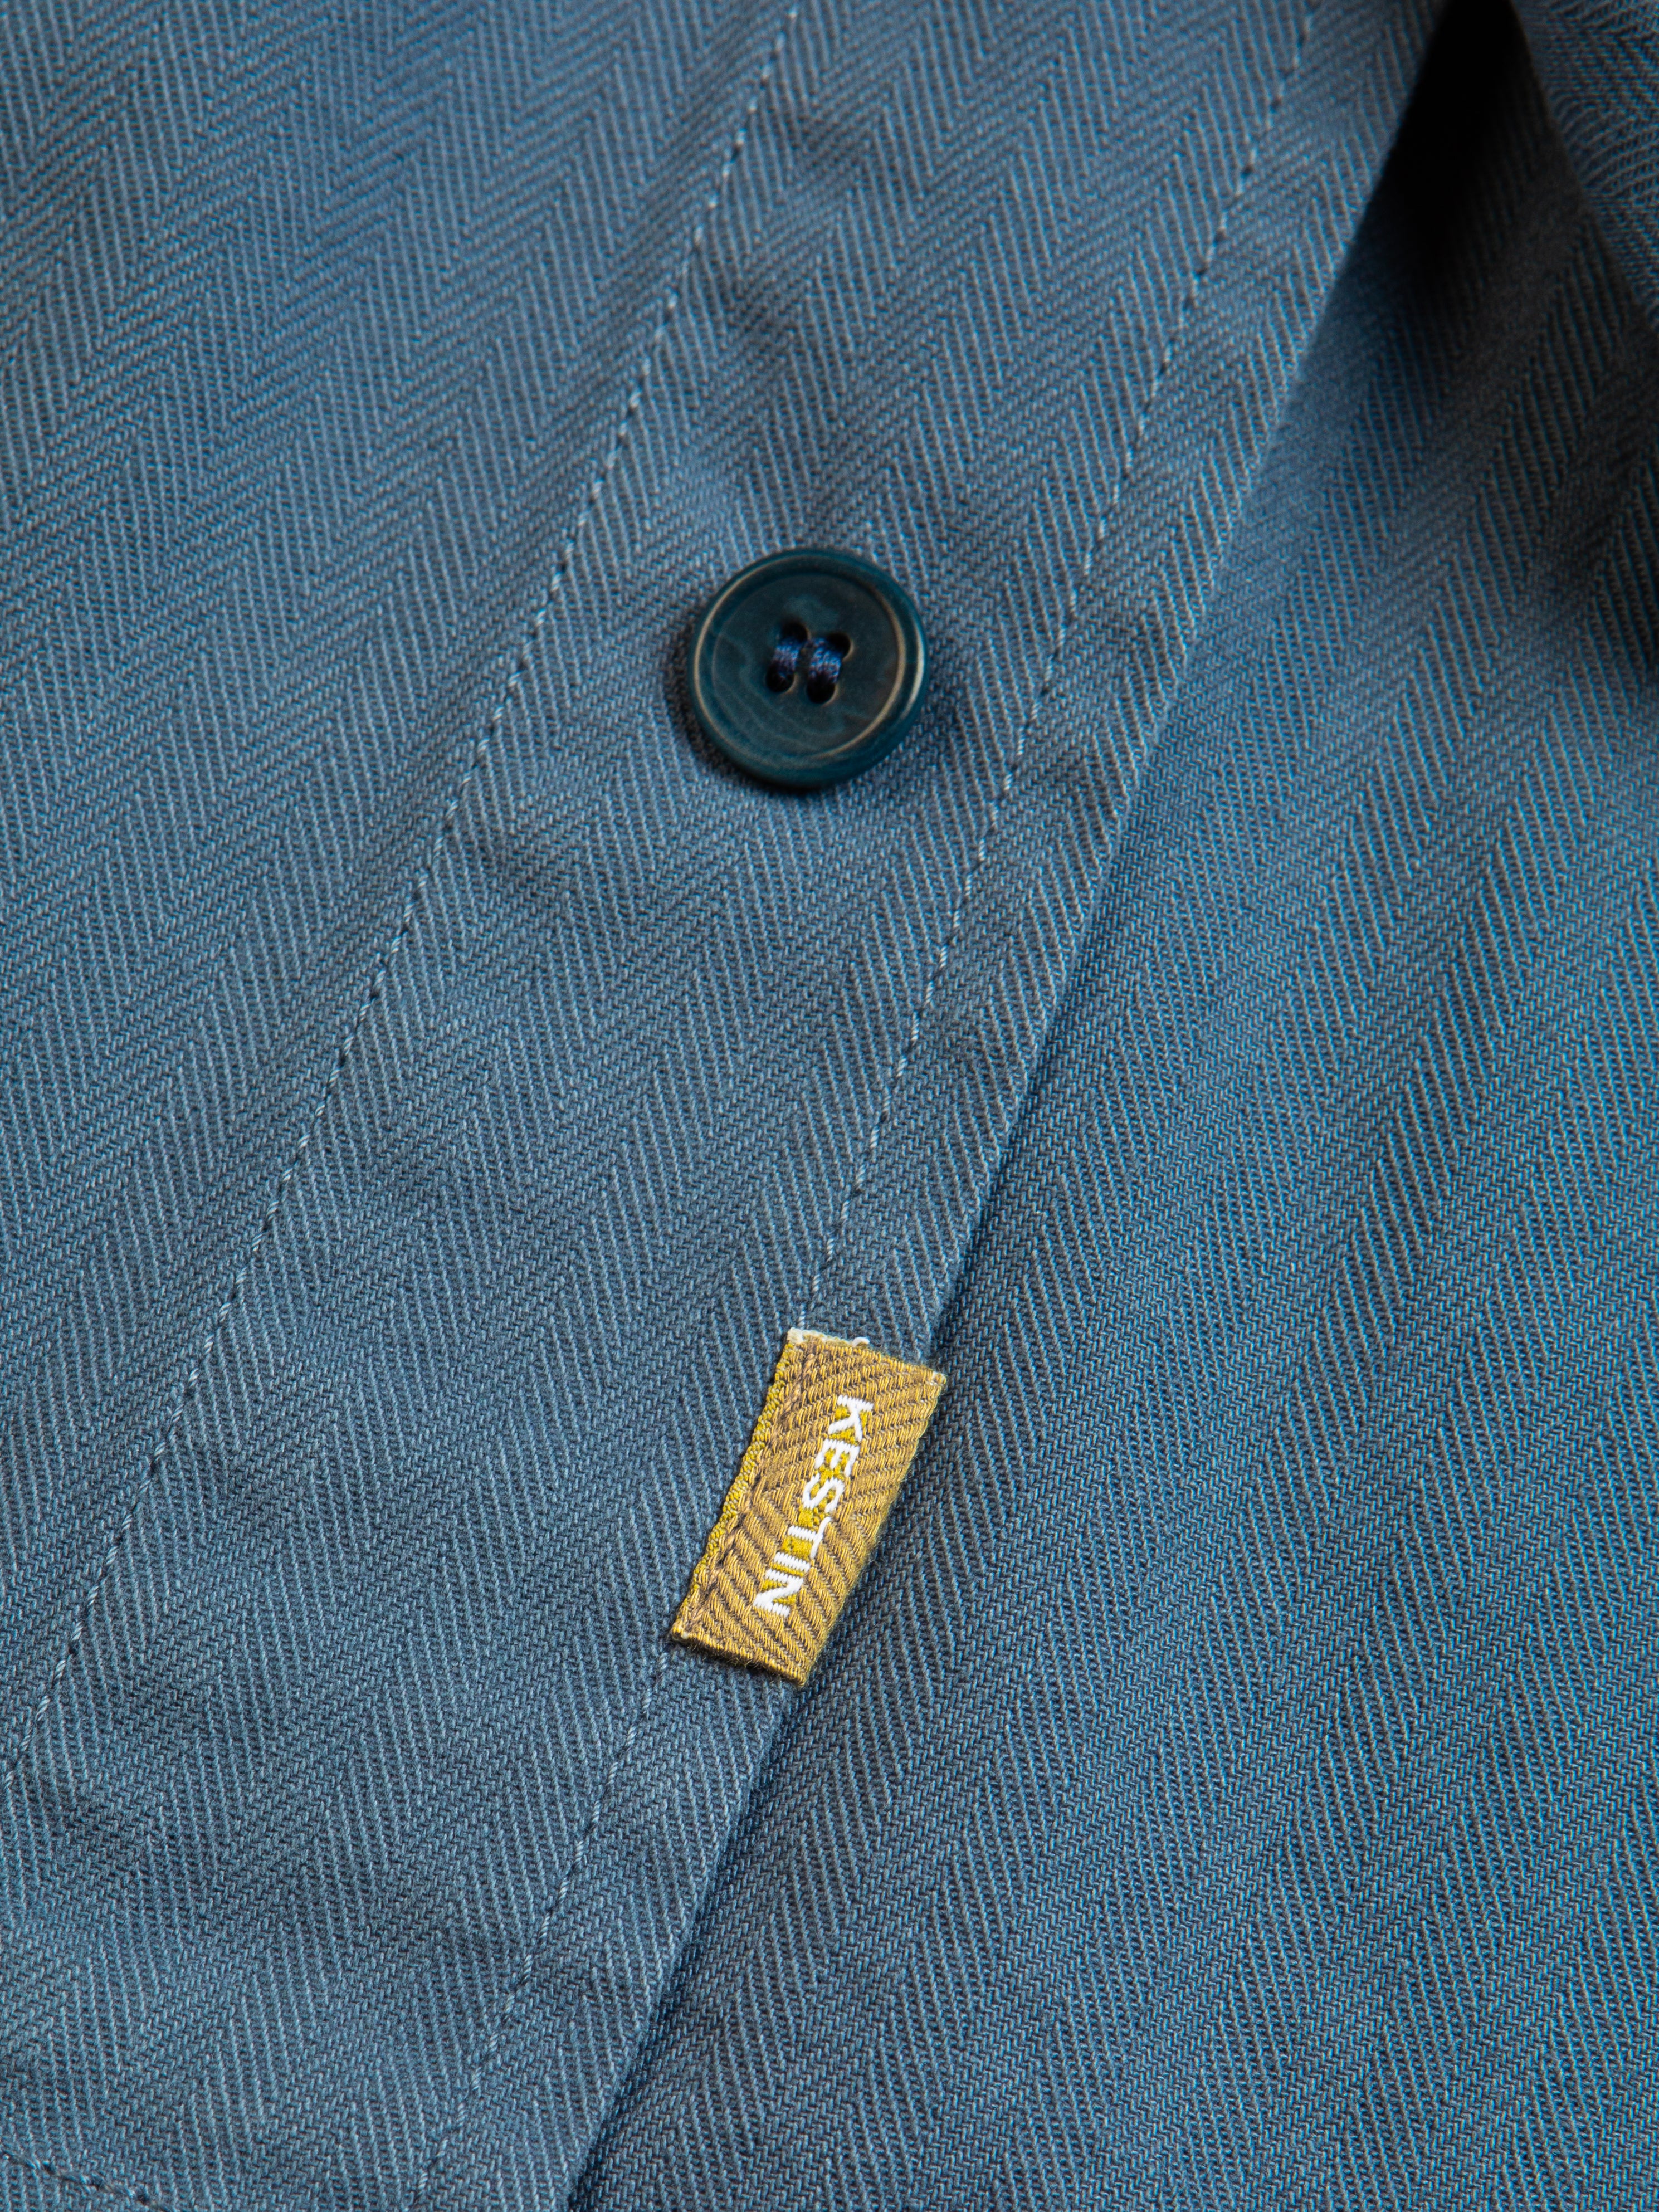 St Abbs Overshirt in Blue